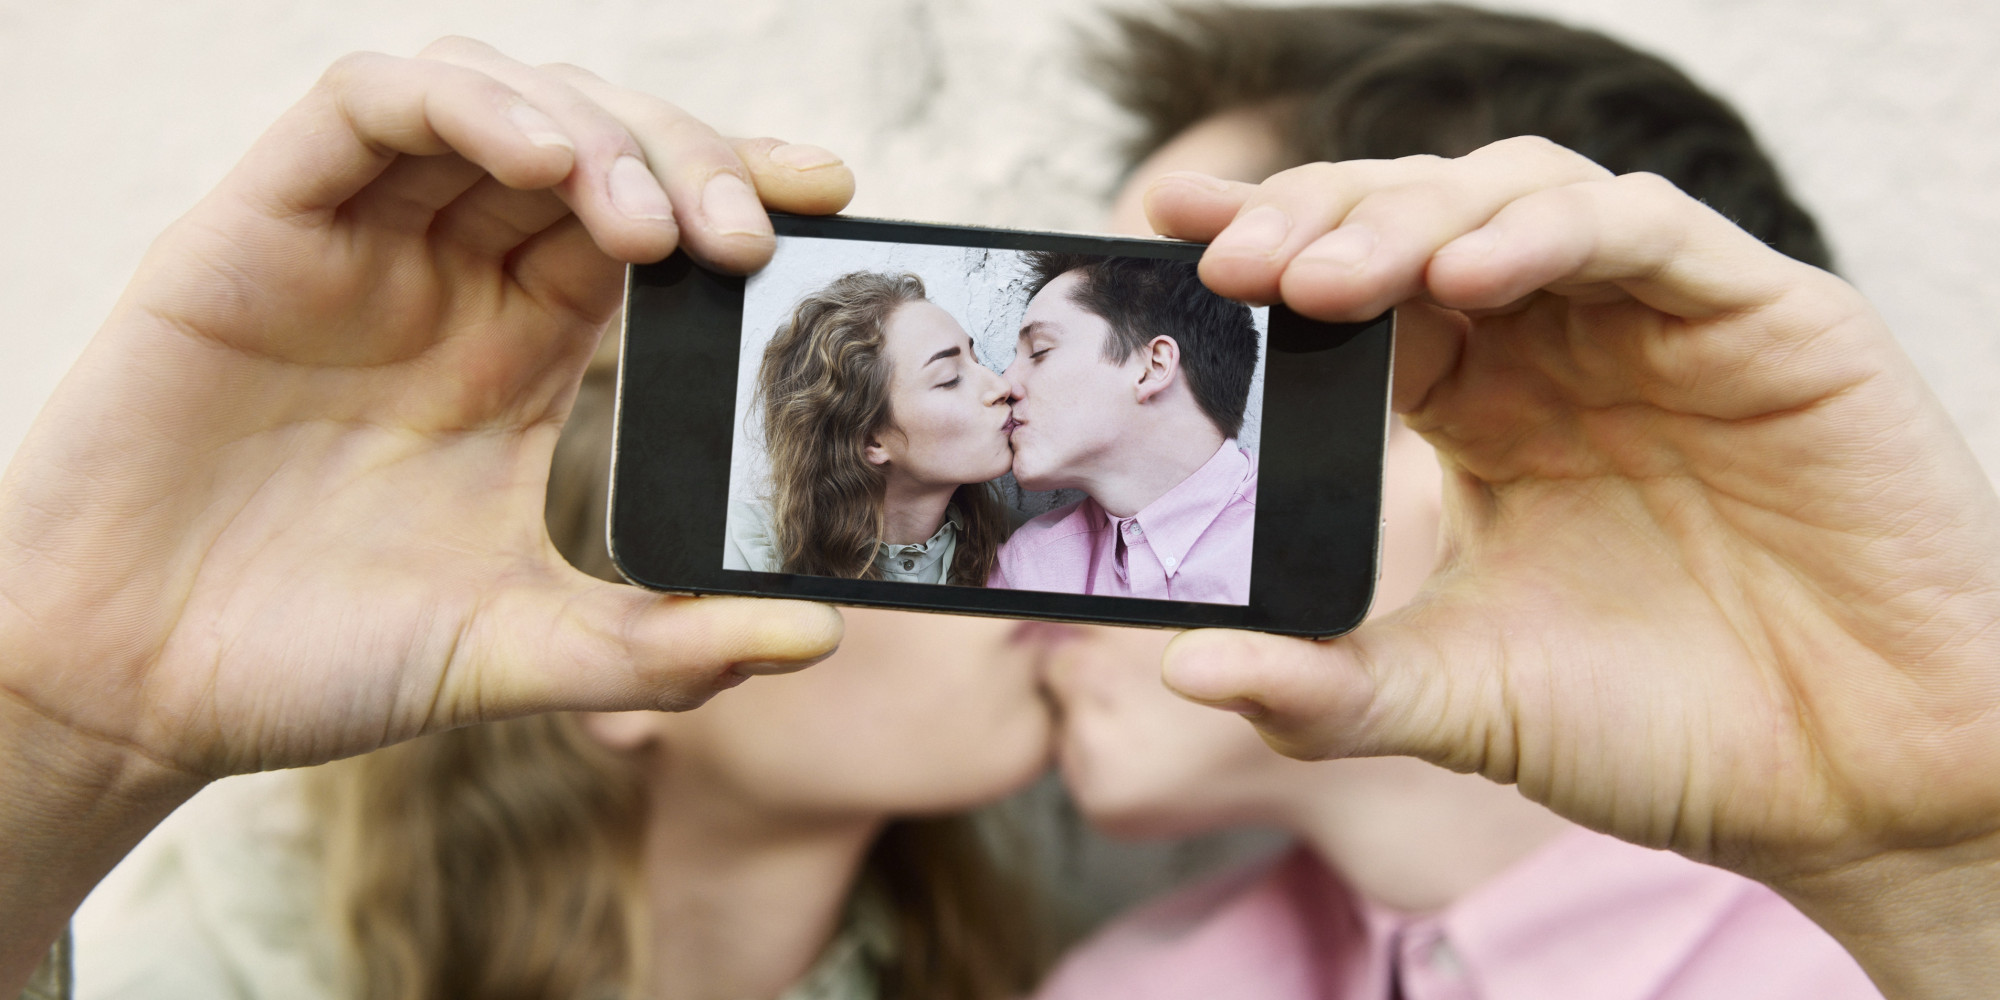 Couple photographing themselves kissing.